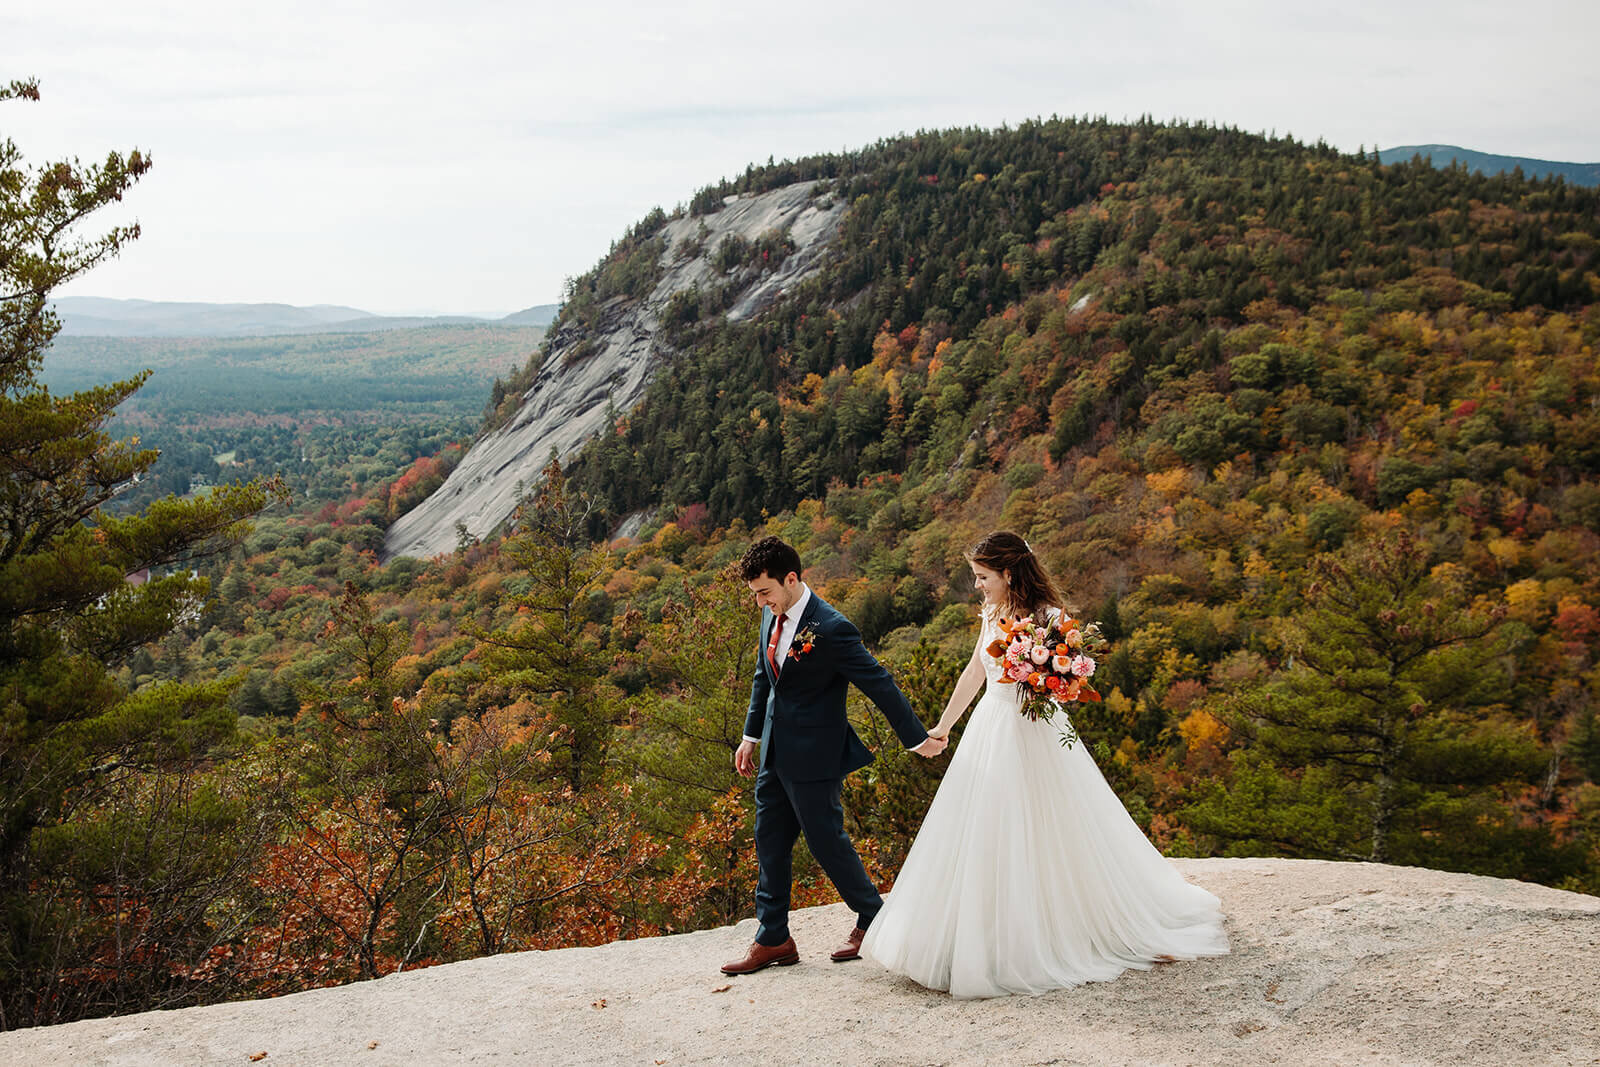  The couple steals a quiet moment after their elopement ceremony to take in the view and each other in the White Mountains in New Hampshire. New Hampshire elopement 